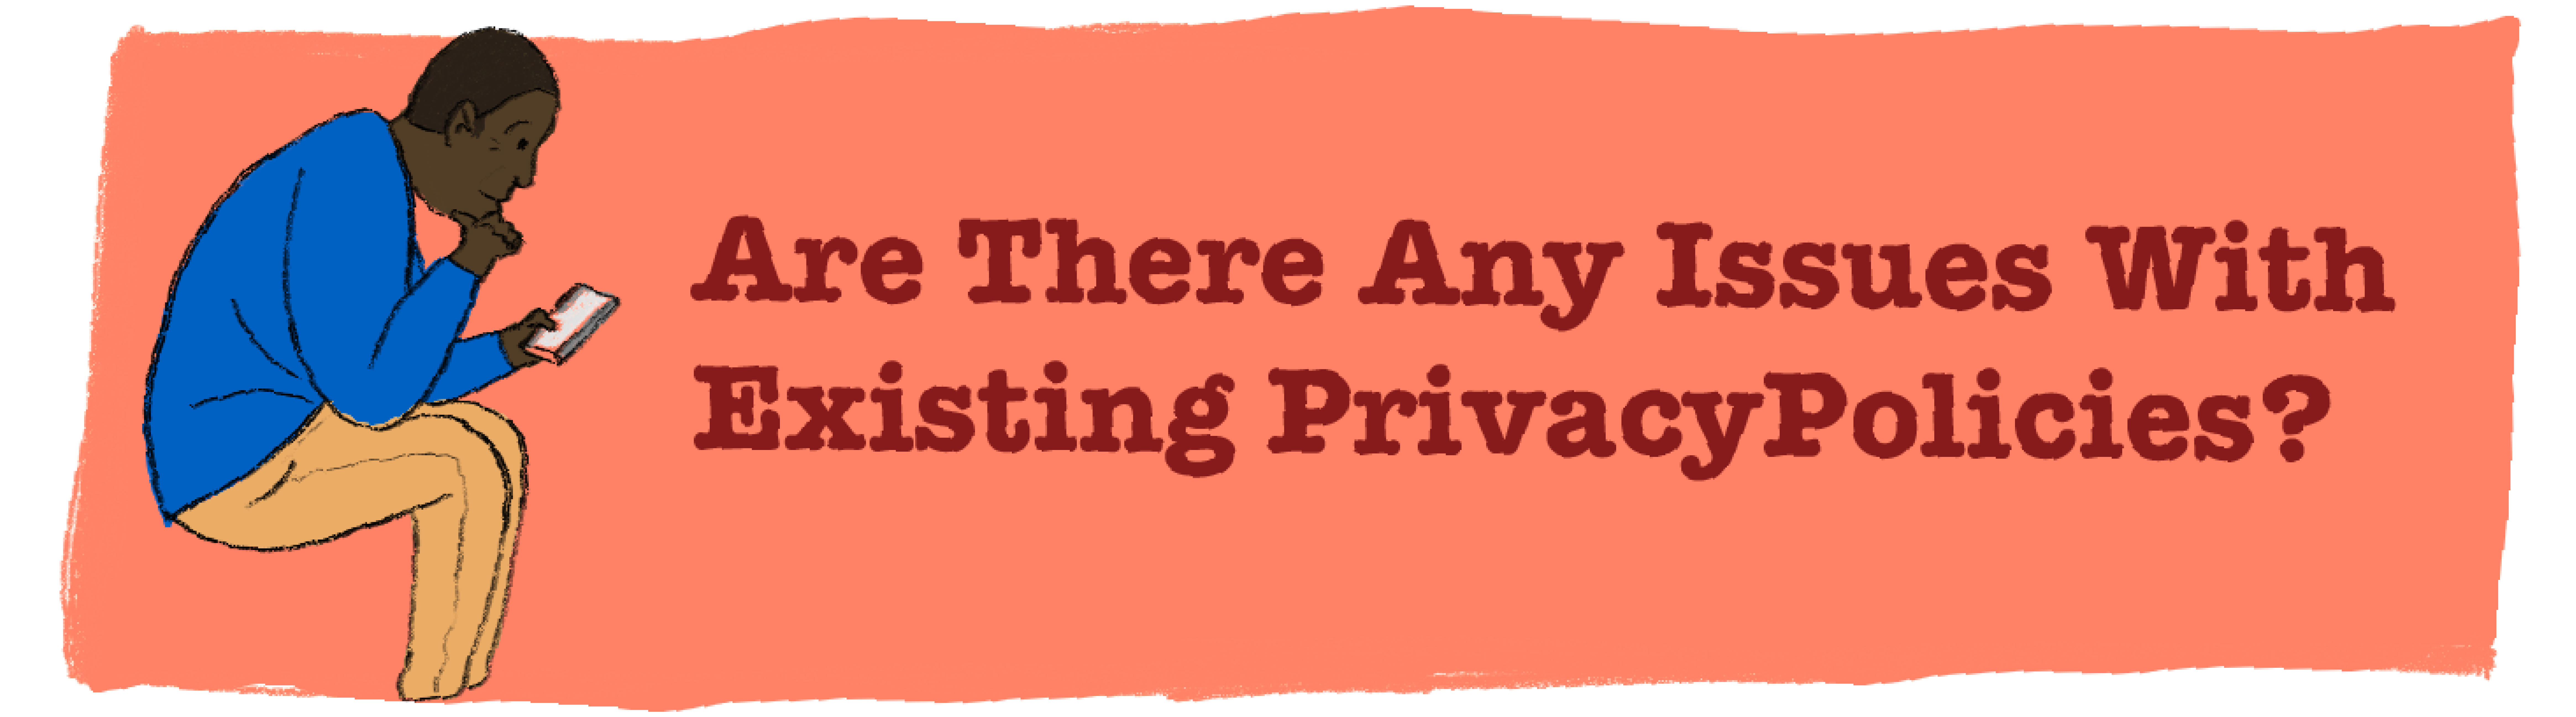 Are there any issues with existing privacy policies?